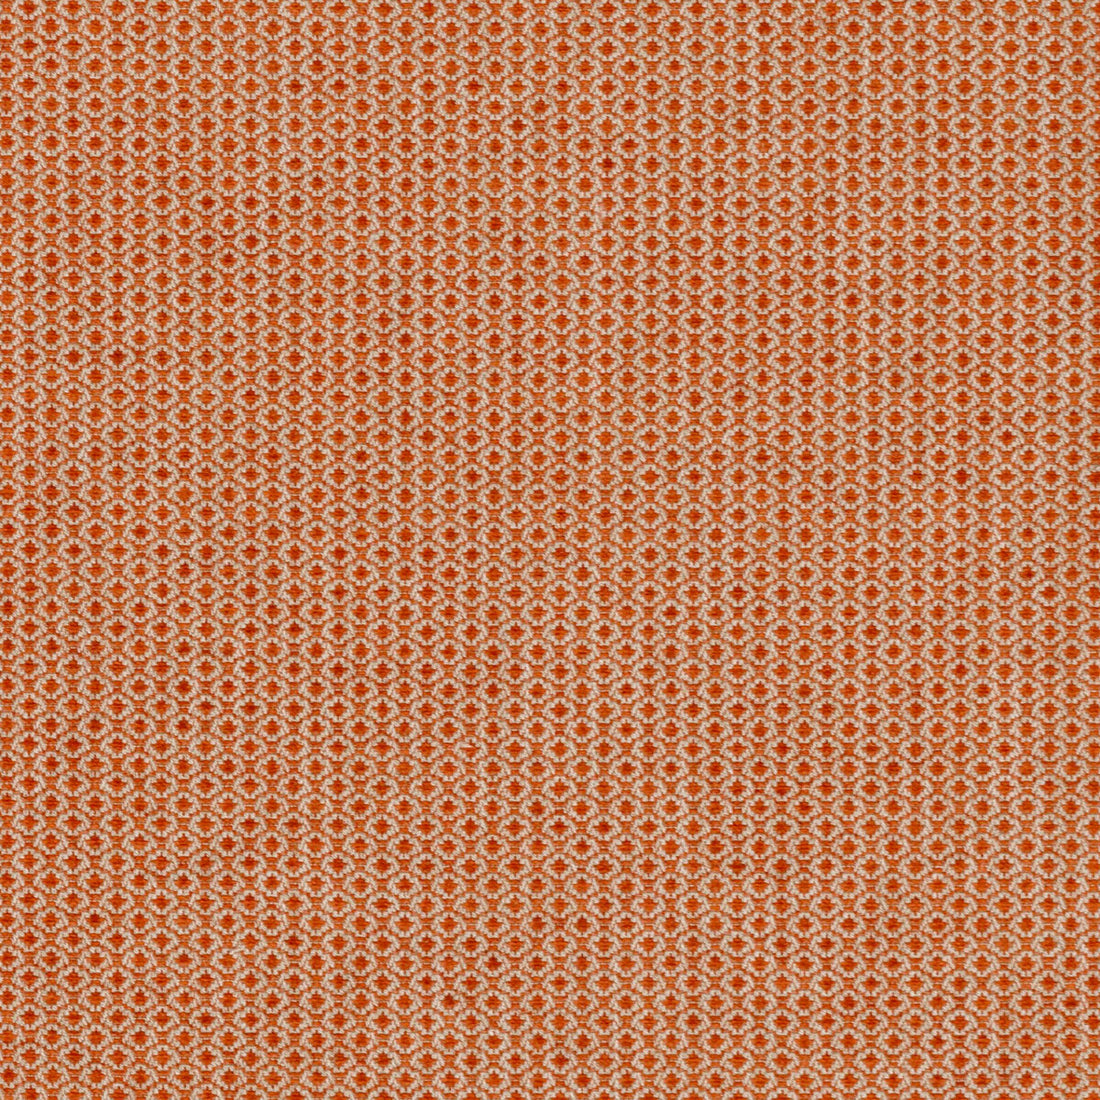 Cosgrove fabric in tangerine color - pattern BFC-3672.12.0 - by Lee Jofa in the Blithfield collection